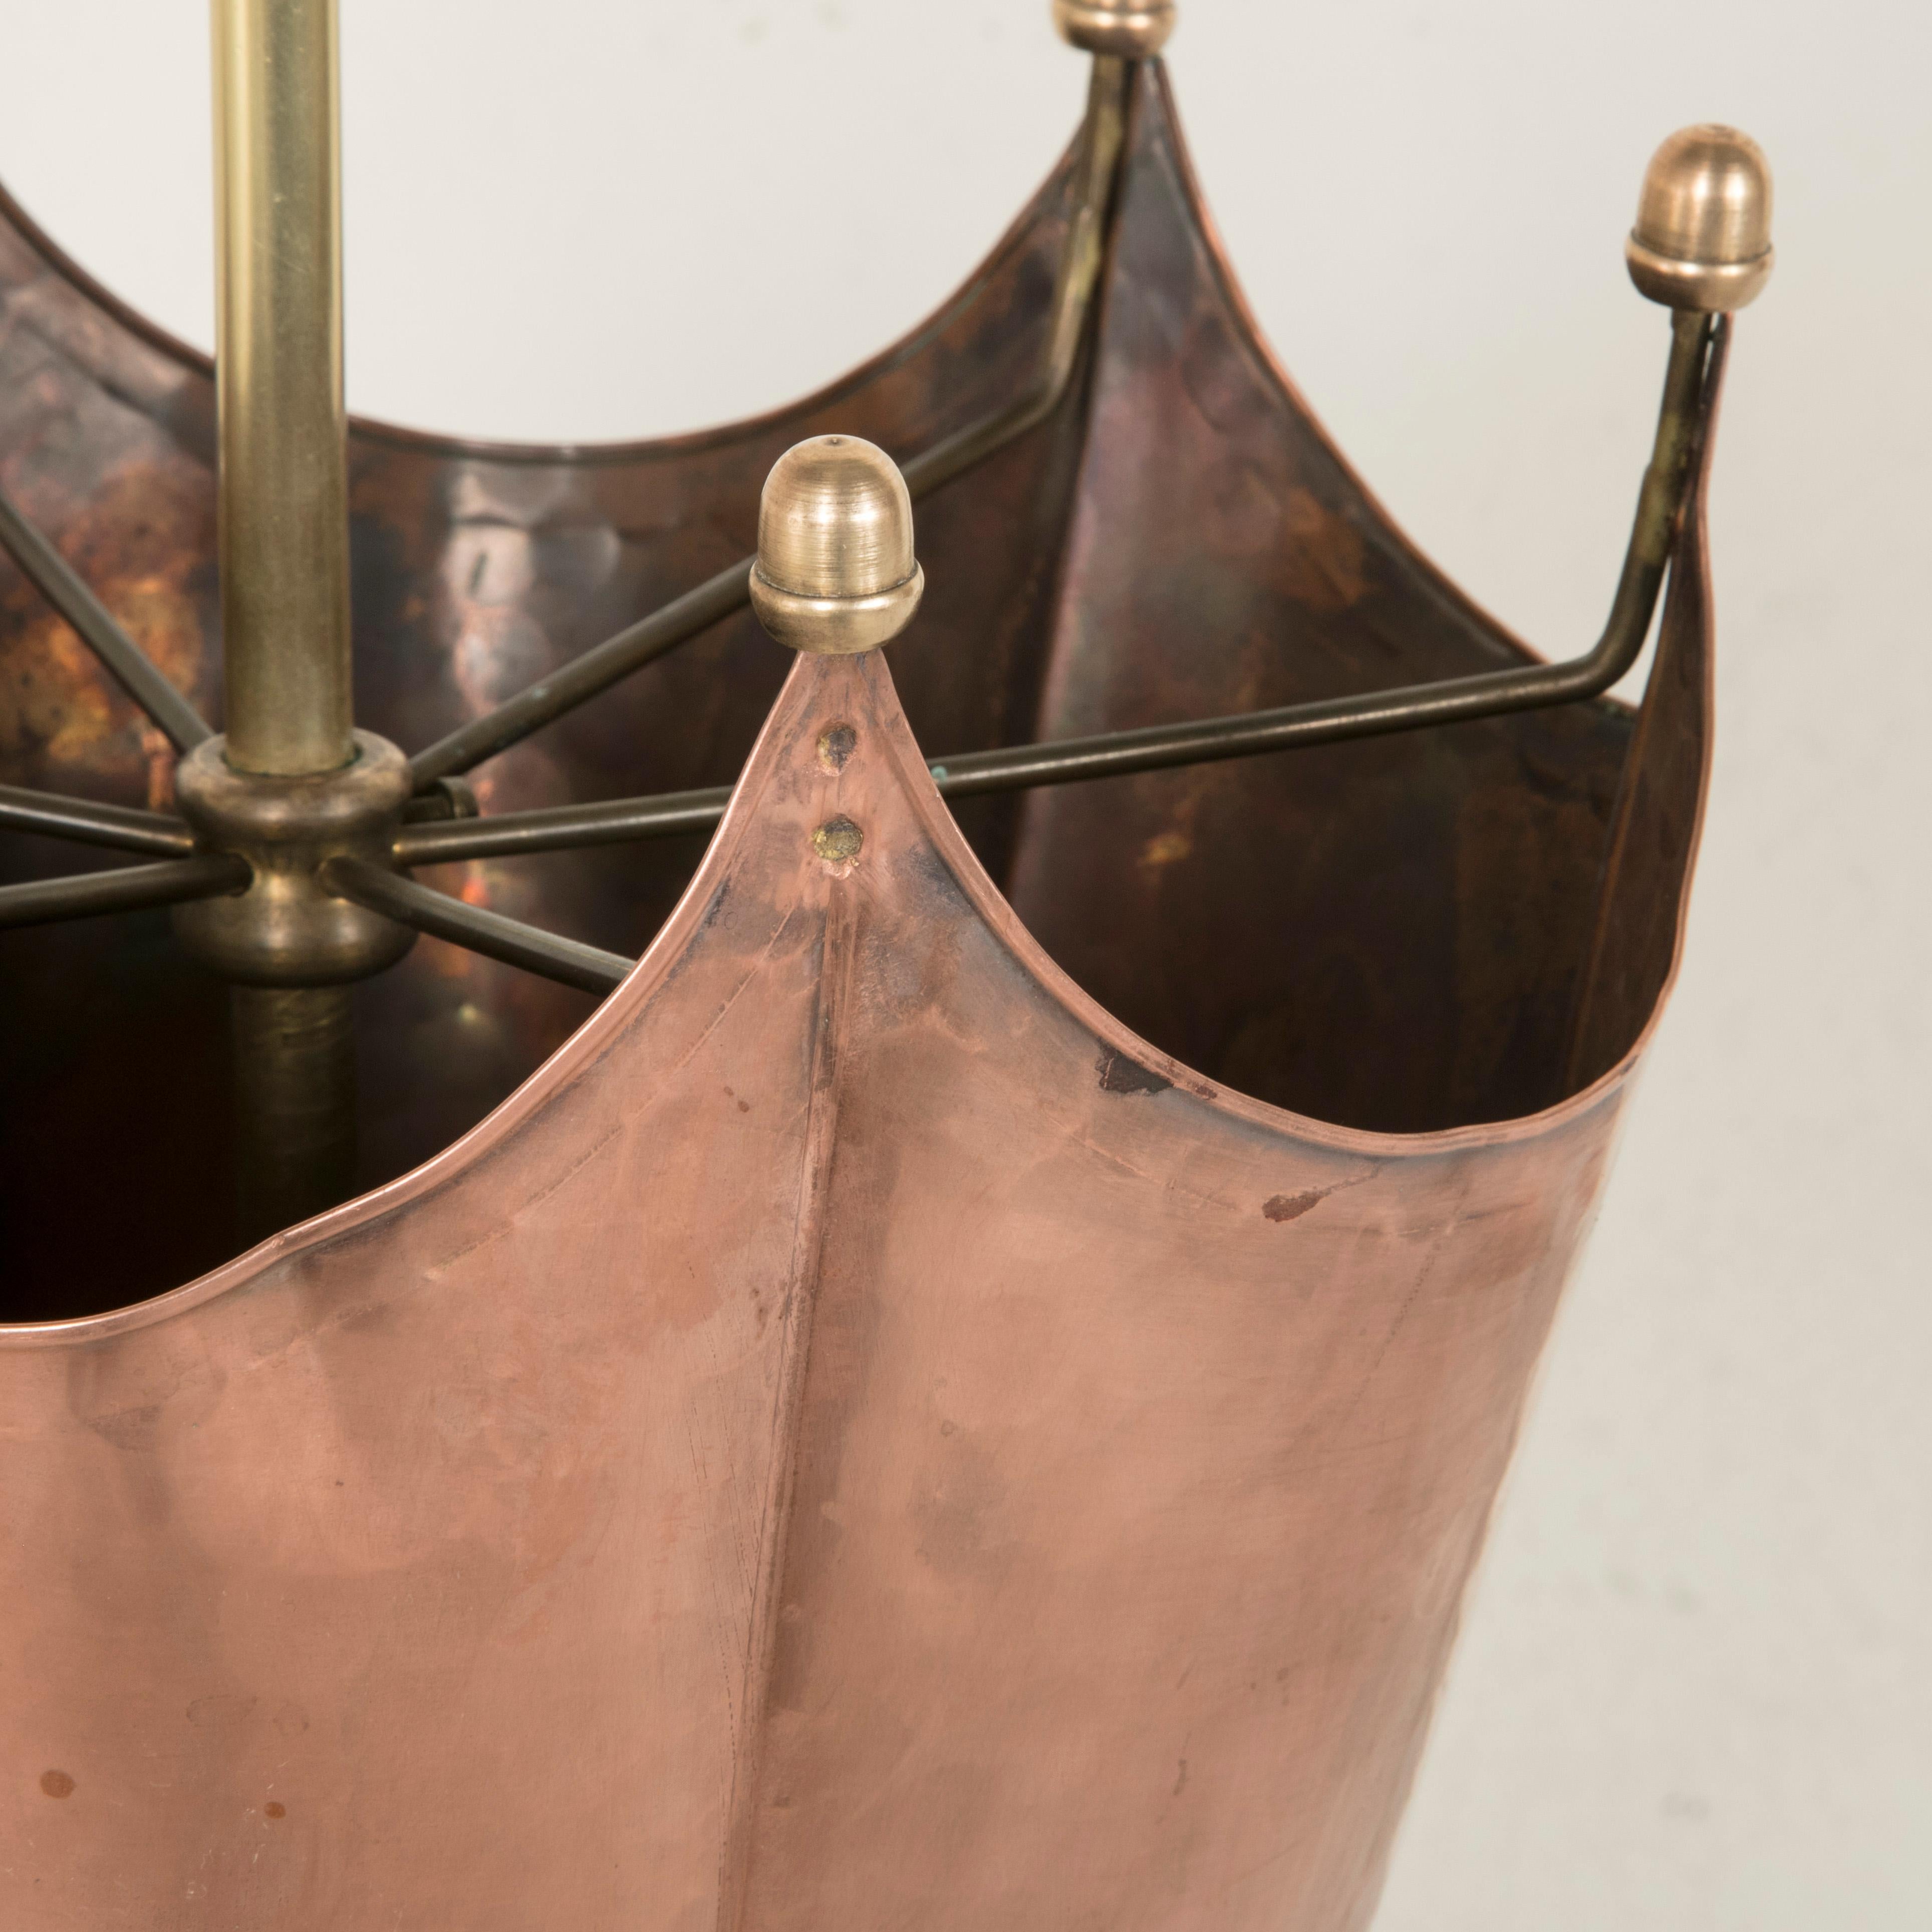 20th Century Midcentury French Copper and Brass Umbrella Holder or Umbrella Stand